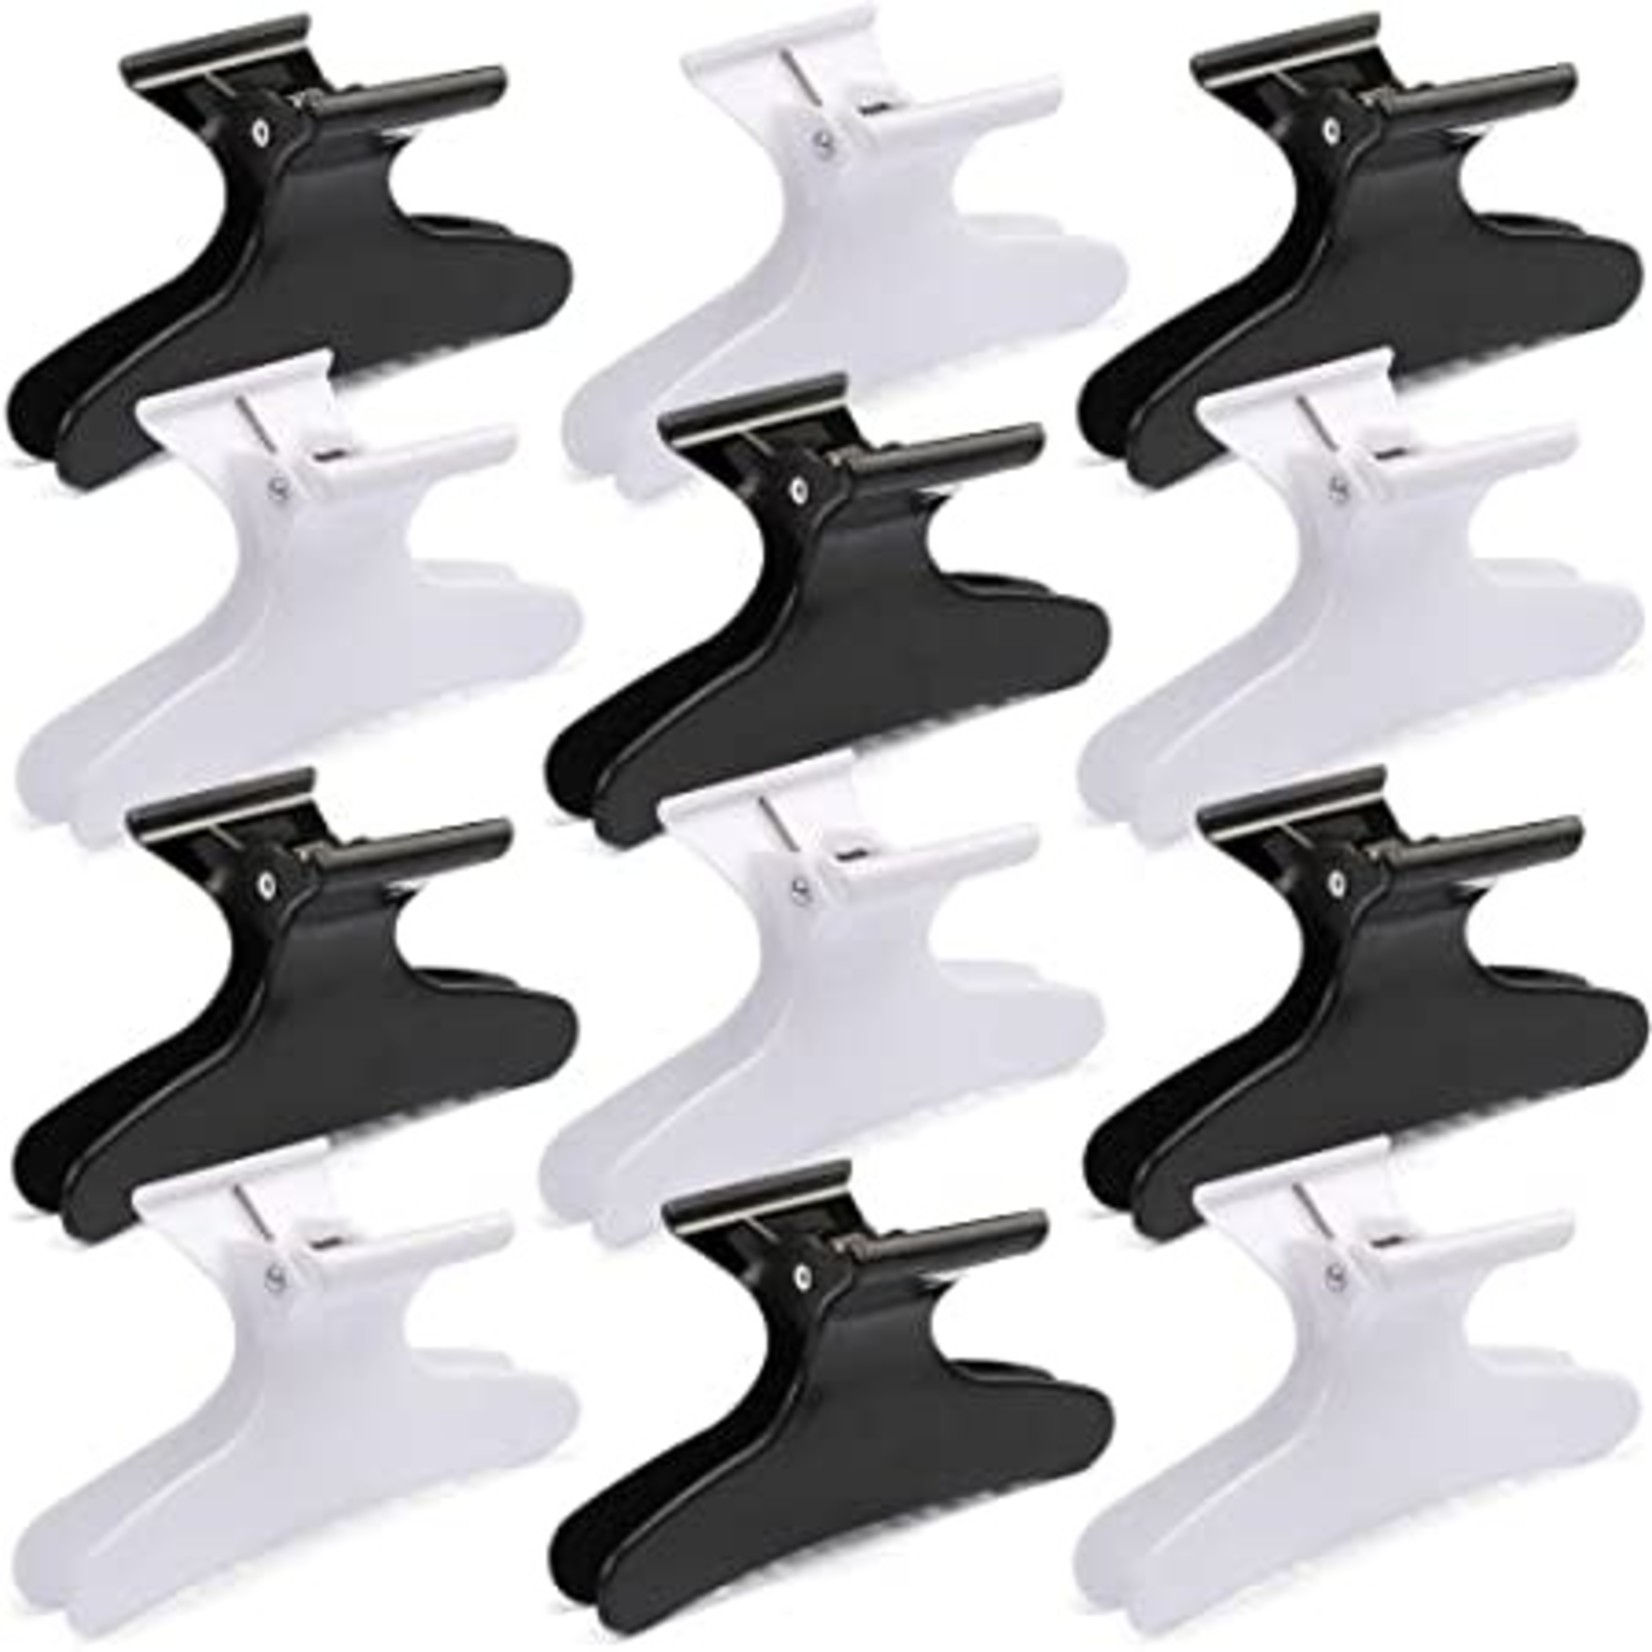 Black and white butteryfly clamps